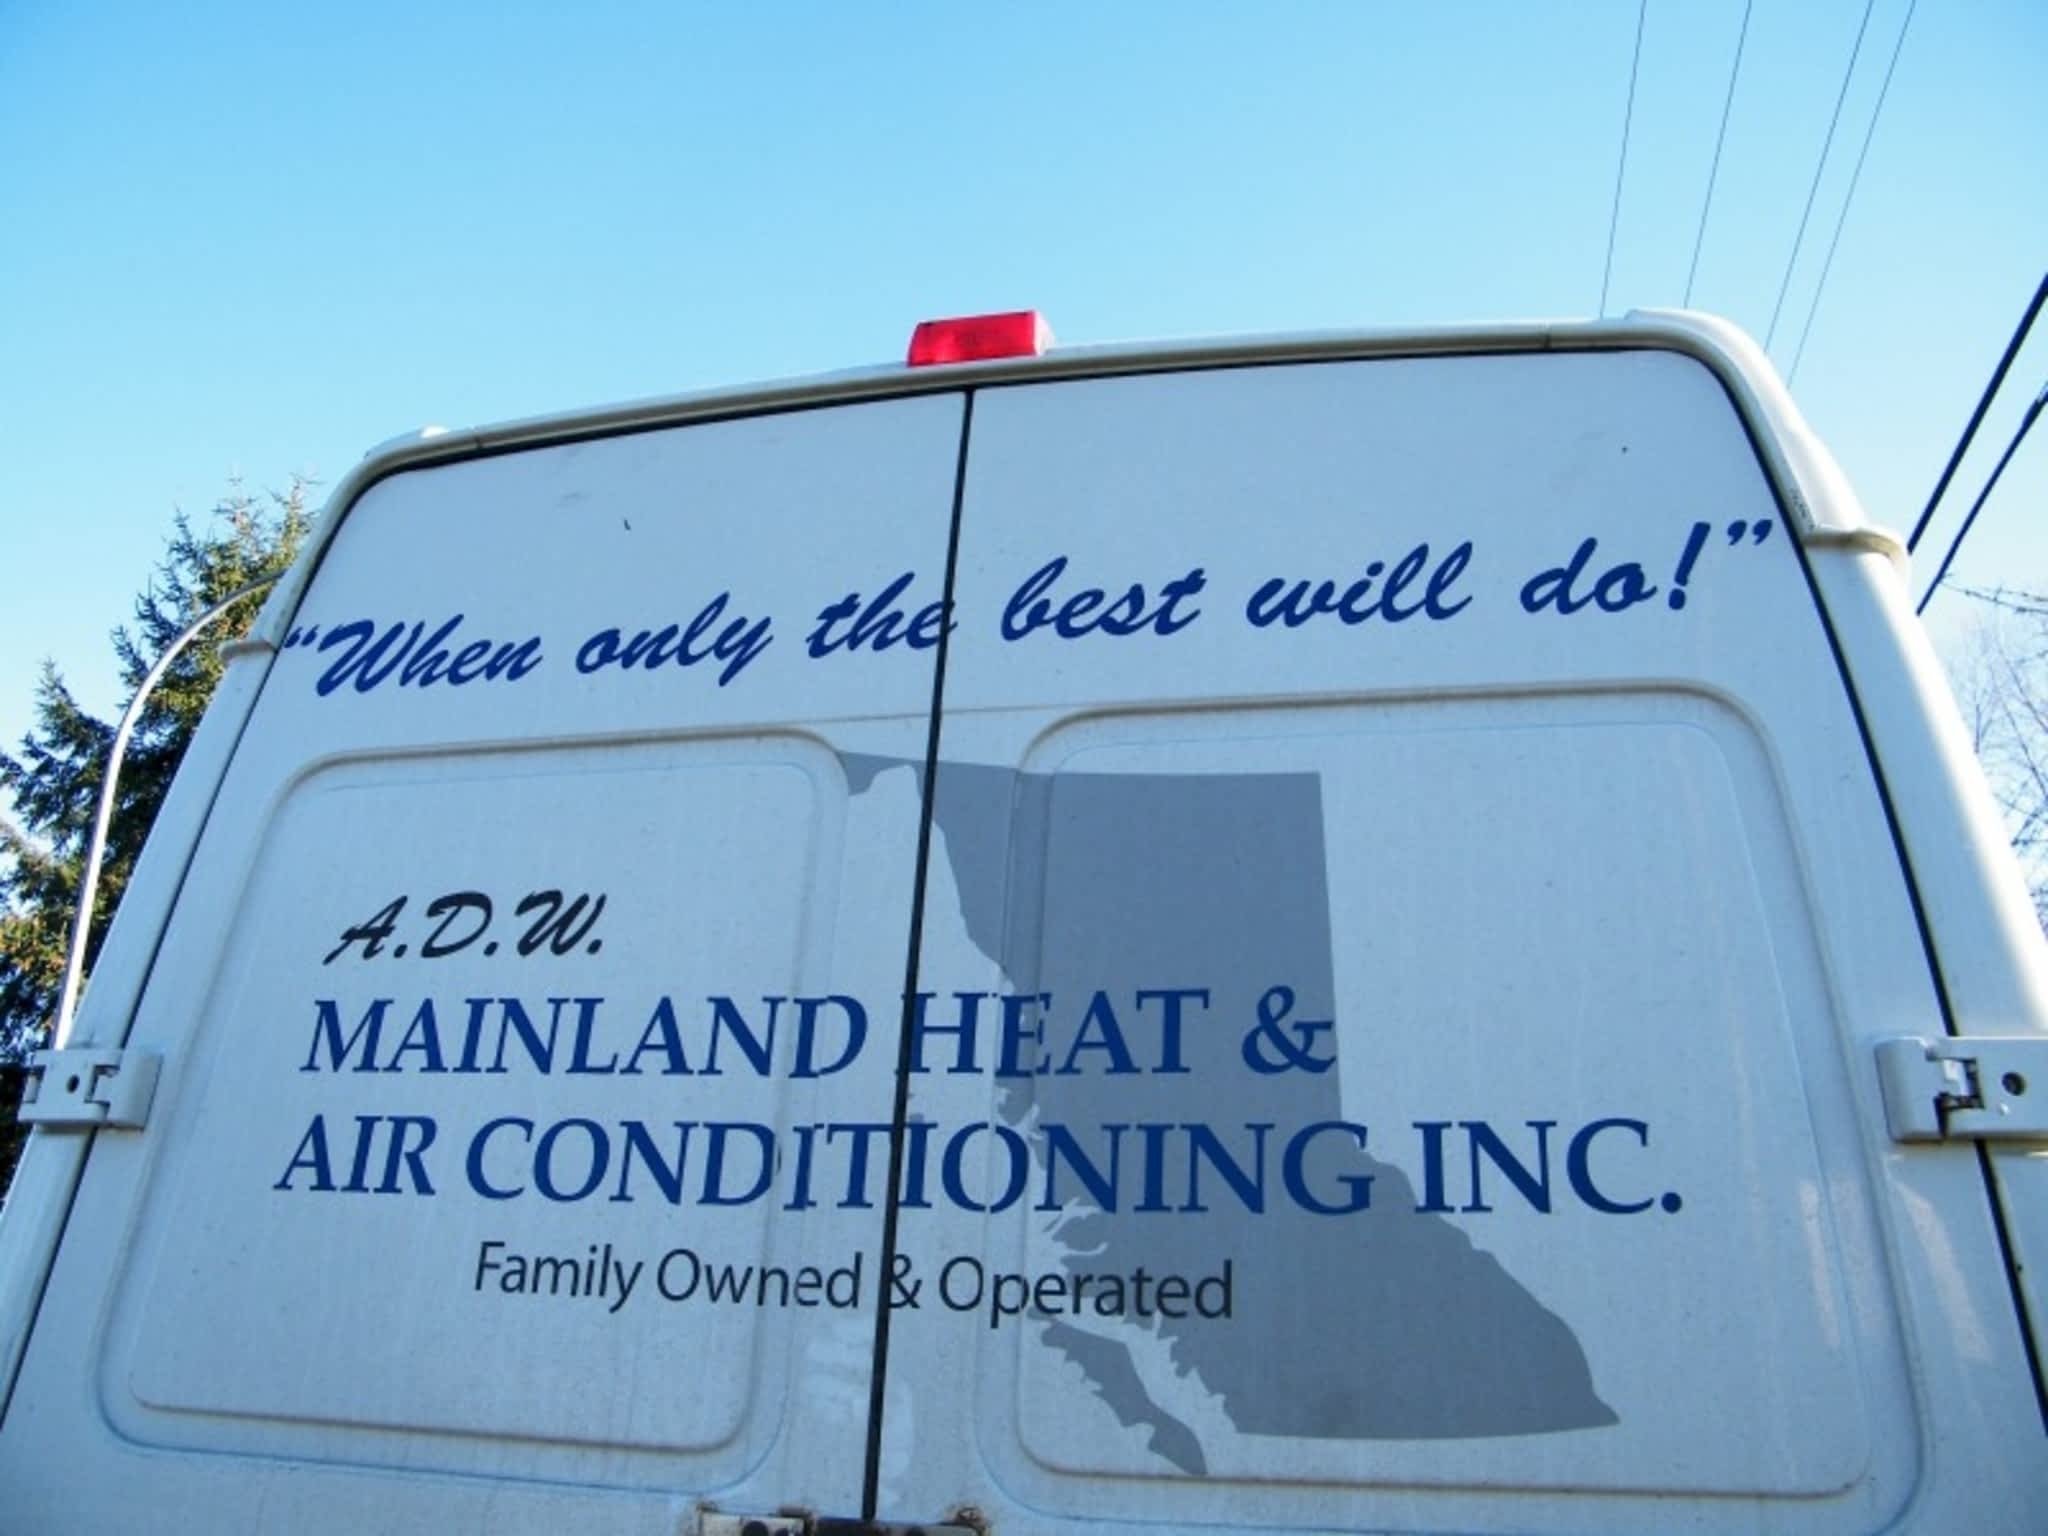 photo ADW Mainland Heat and Air Conditioning